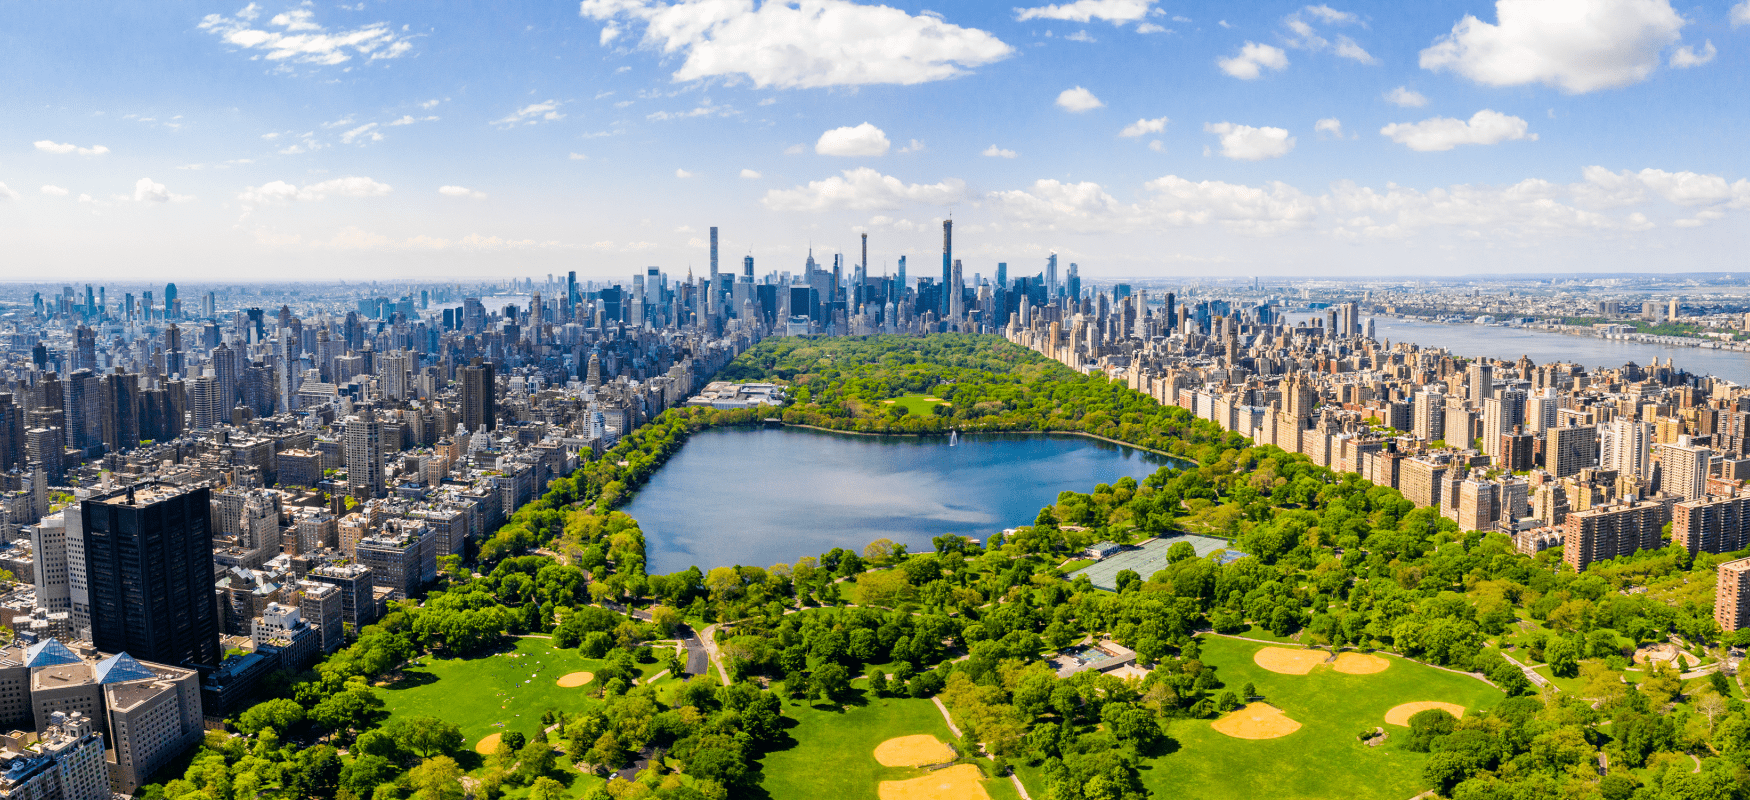 Aerial view of Central Park in NYC - Central Park is affected by Law 97